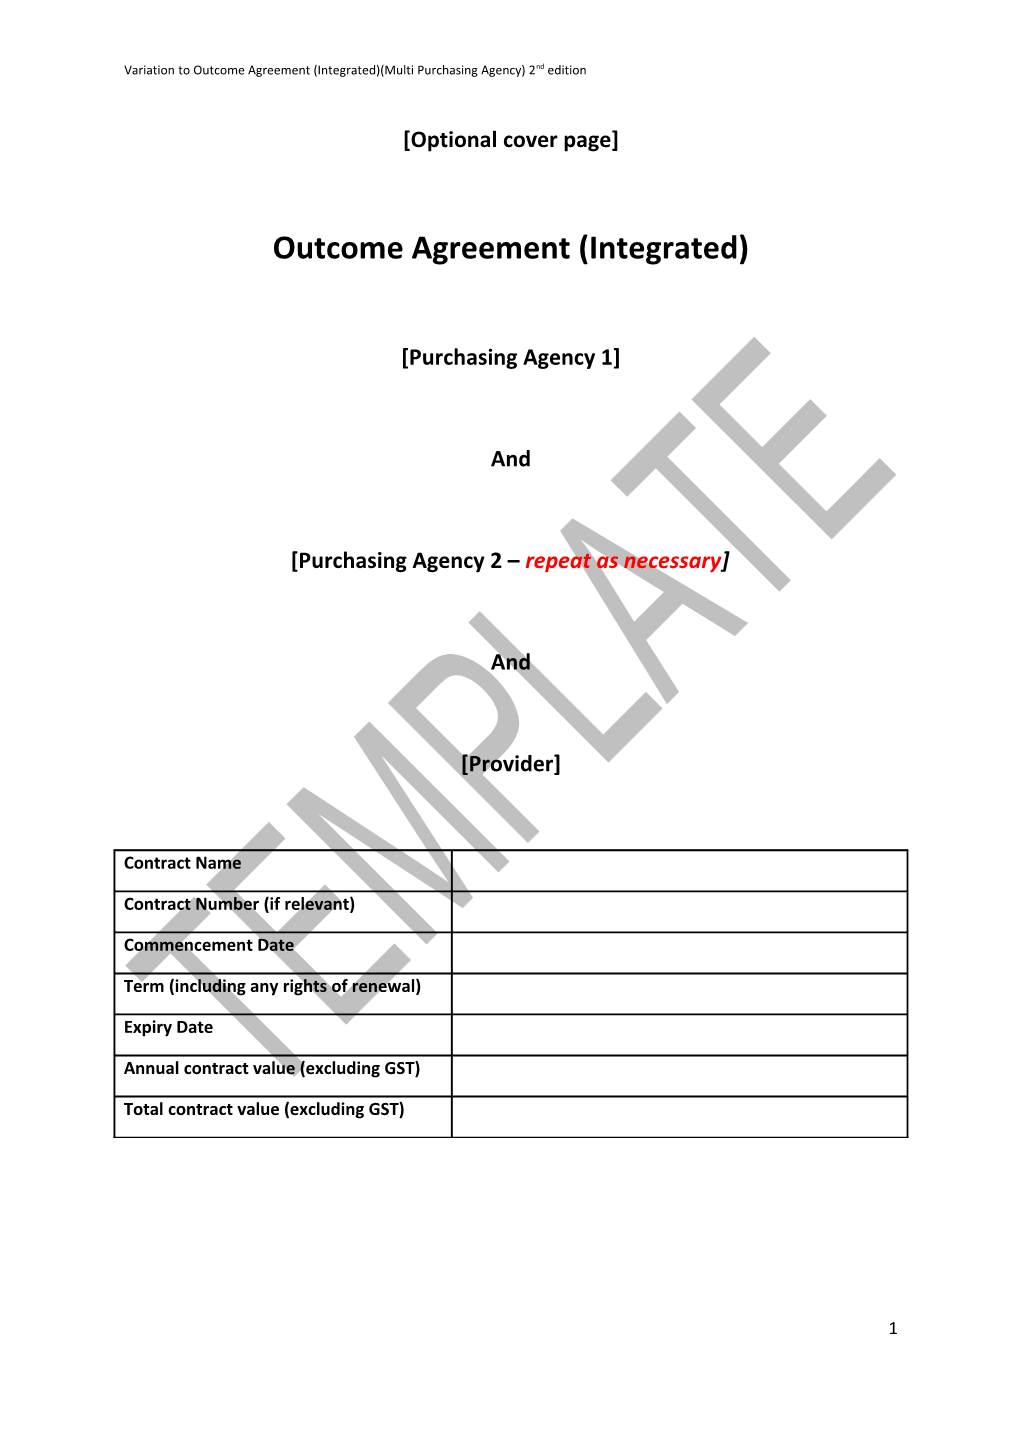 Variation to Outcome Agreement Multi Agency (Integrated)